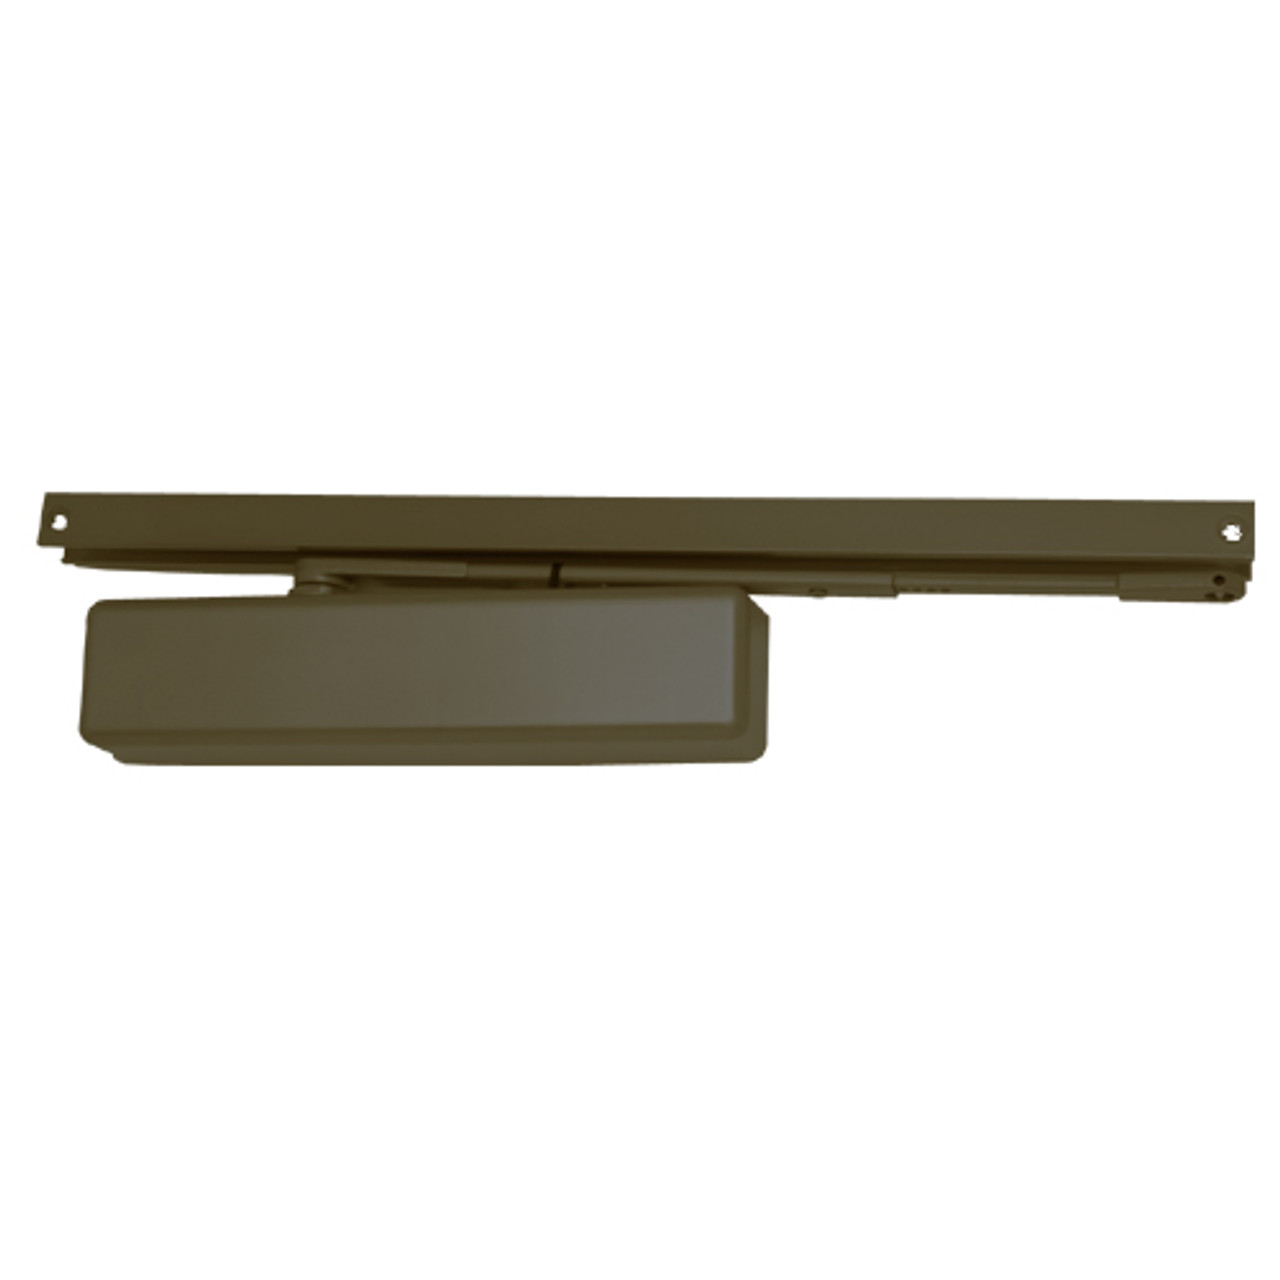 1461T-STD-US10B-DS LCN Surface Mount Door Closer with Standard Arm in Oil Rubbed Bronze Finish